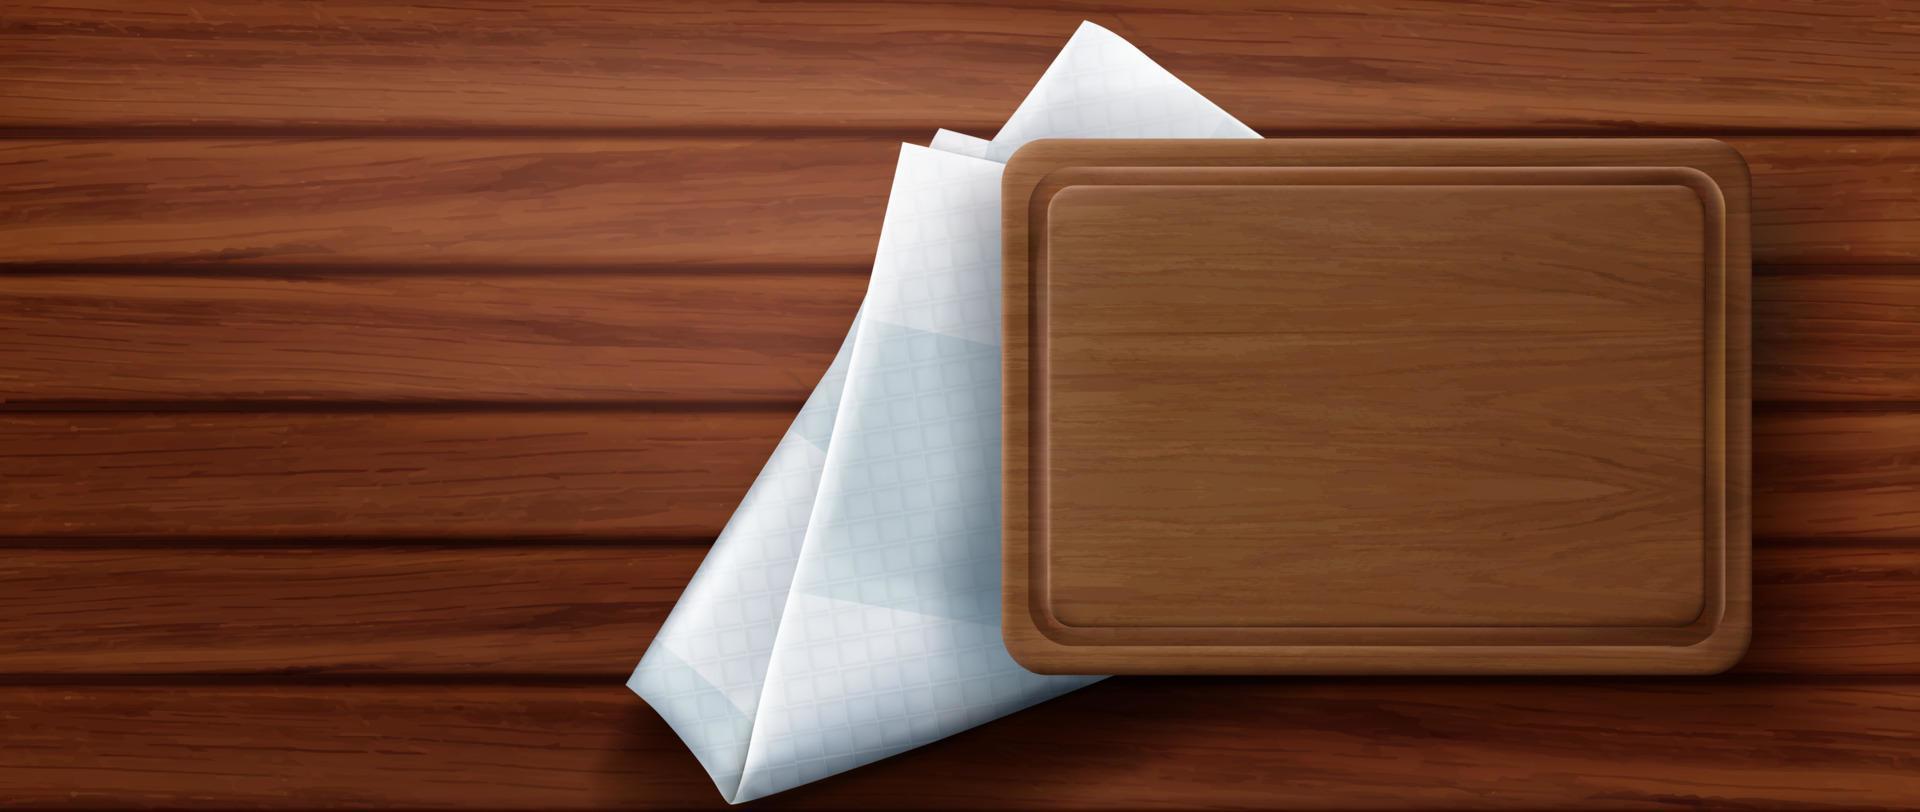 Wooden cutting board on napkin and wood table vector